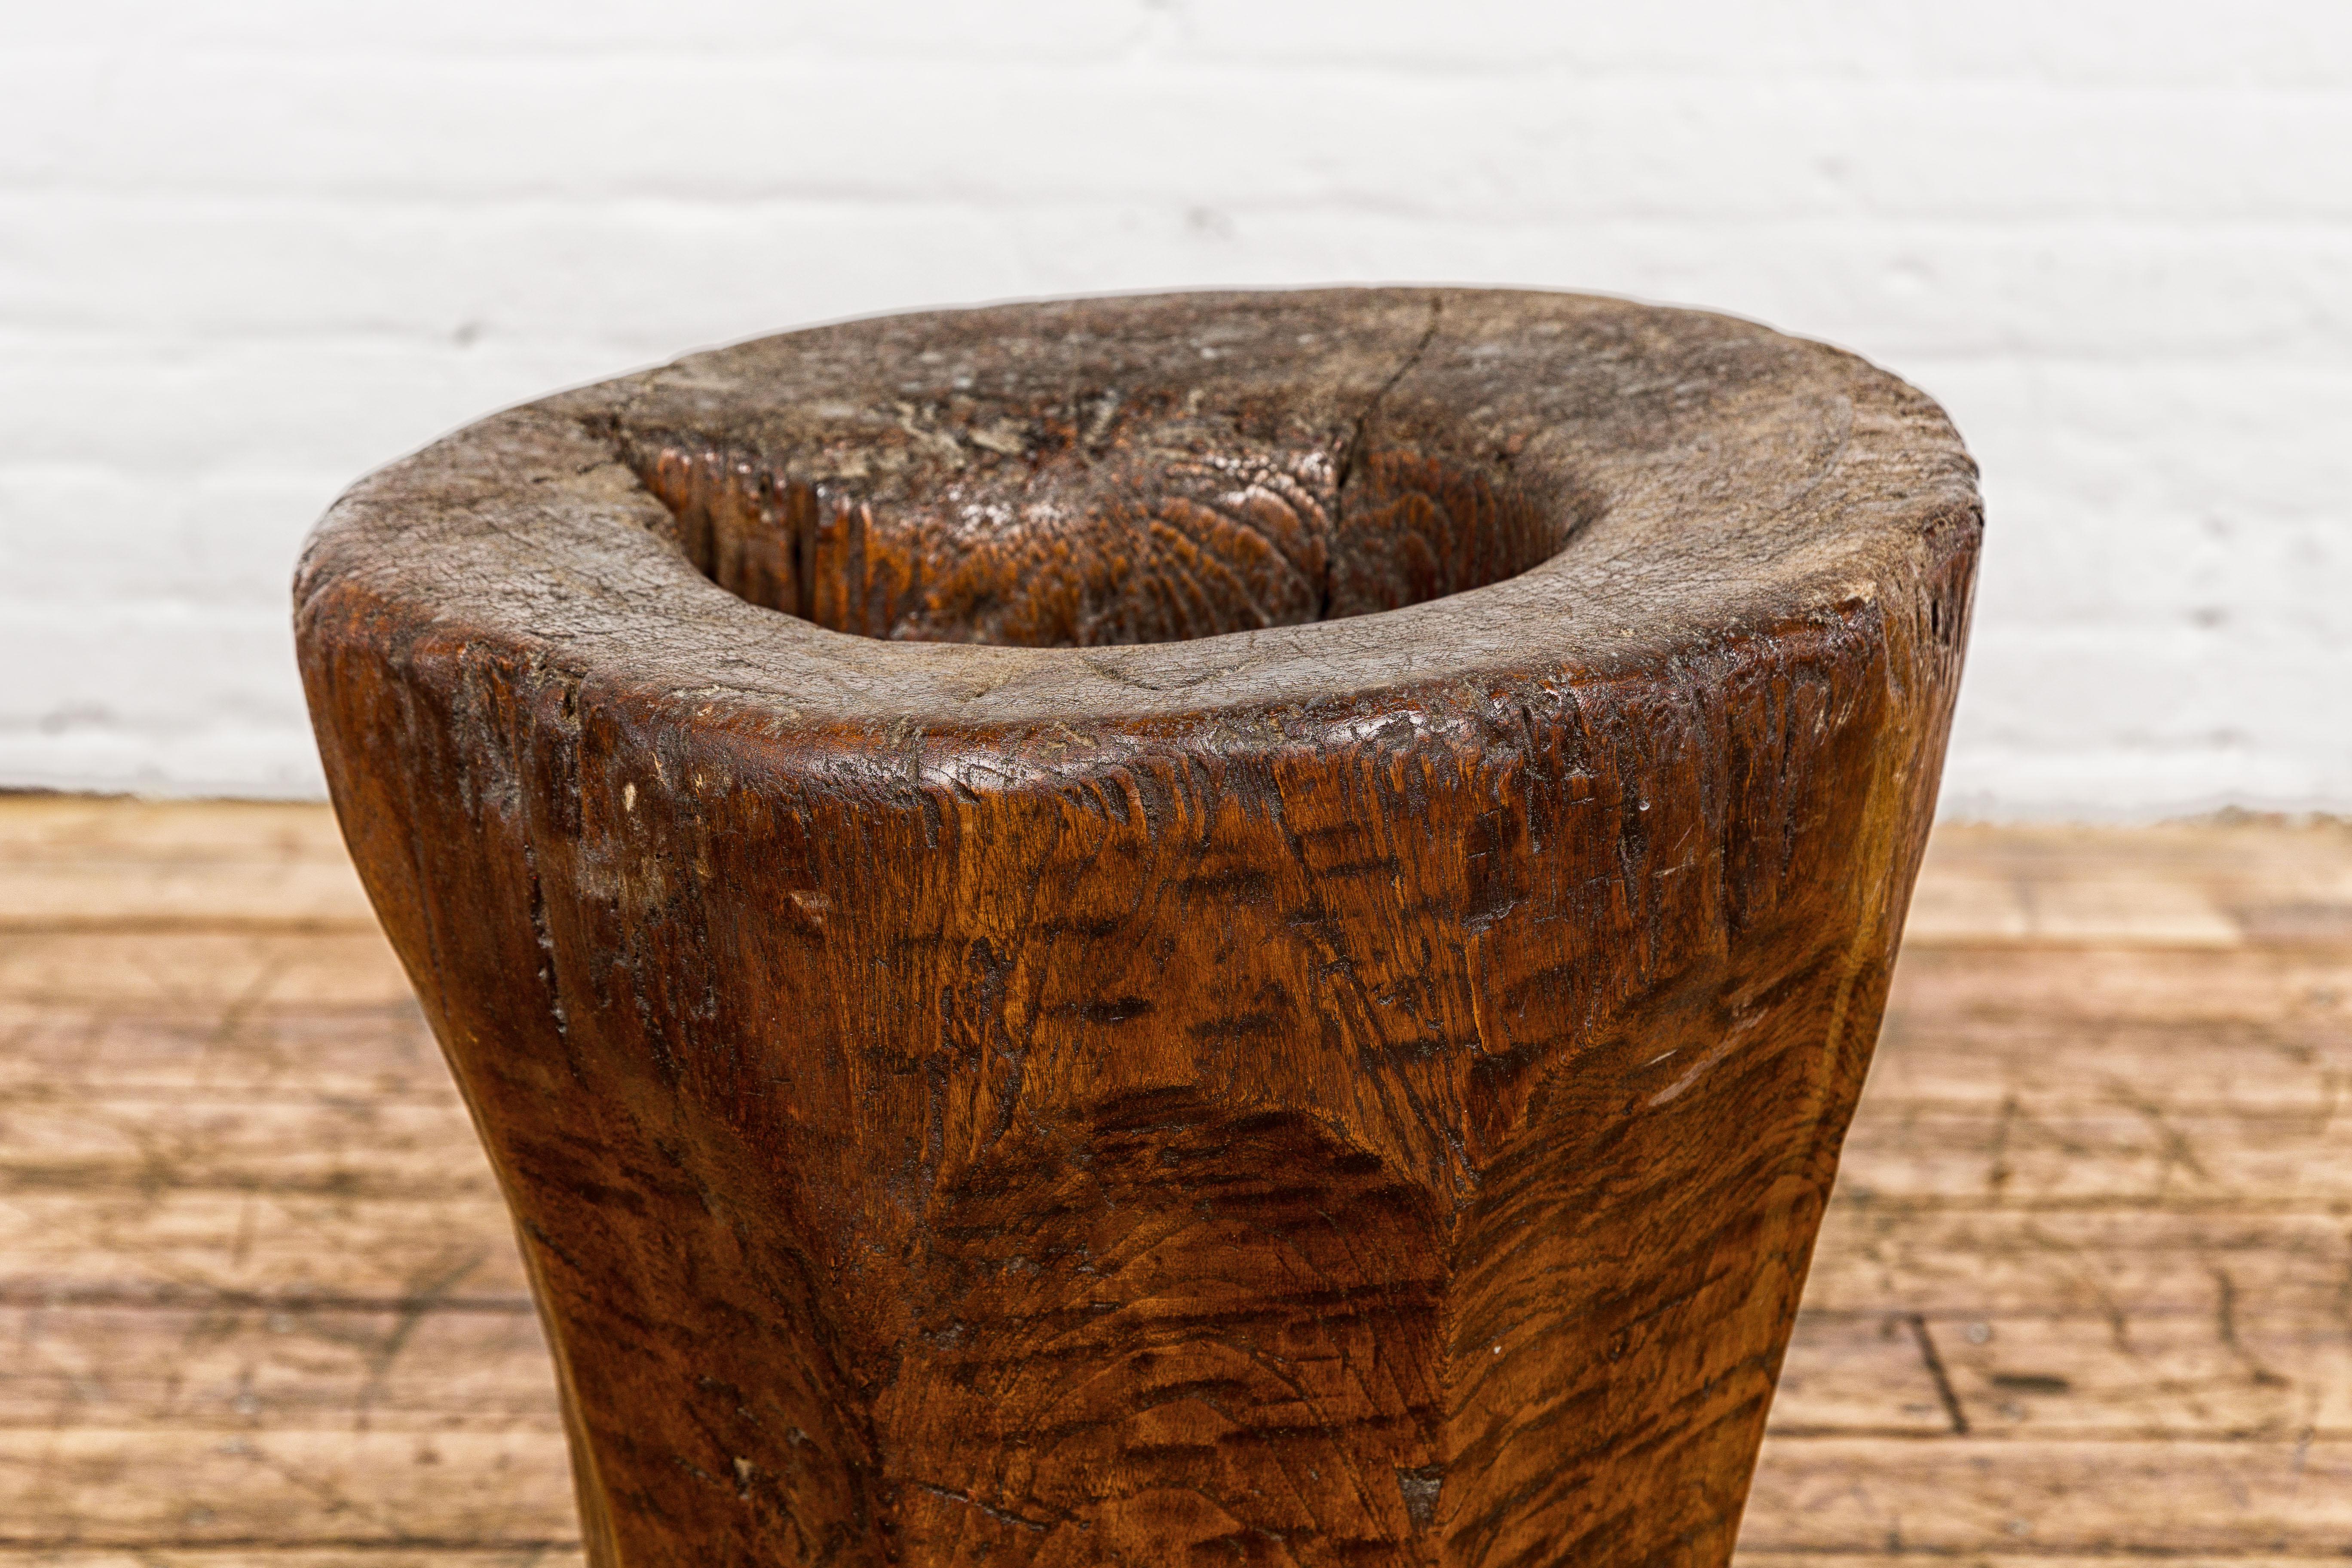 Carved Teak Wood Rustic Mortar Urn Repurposed as an Antique Planter, 19th Century For Sale